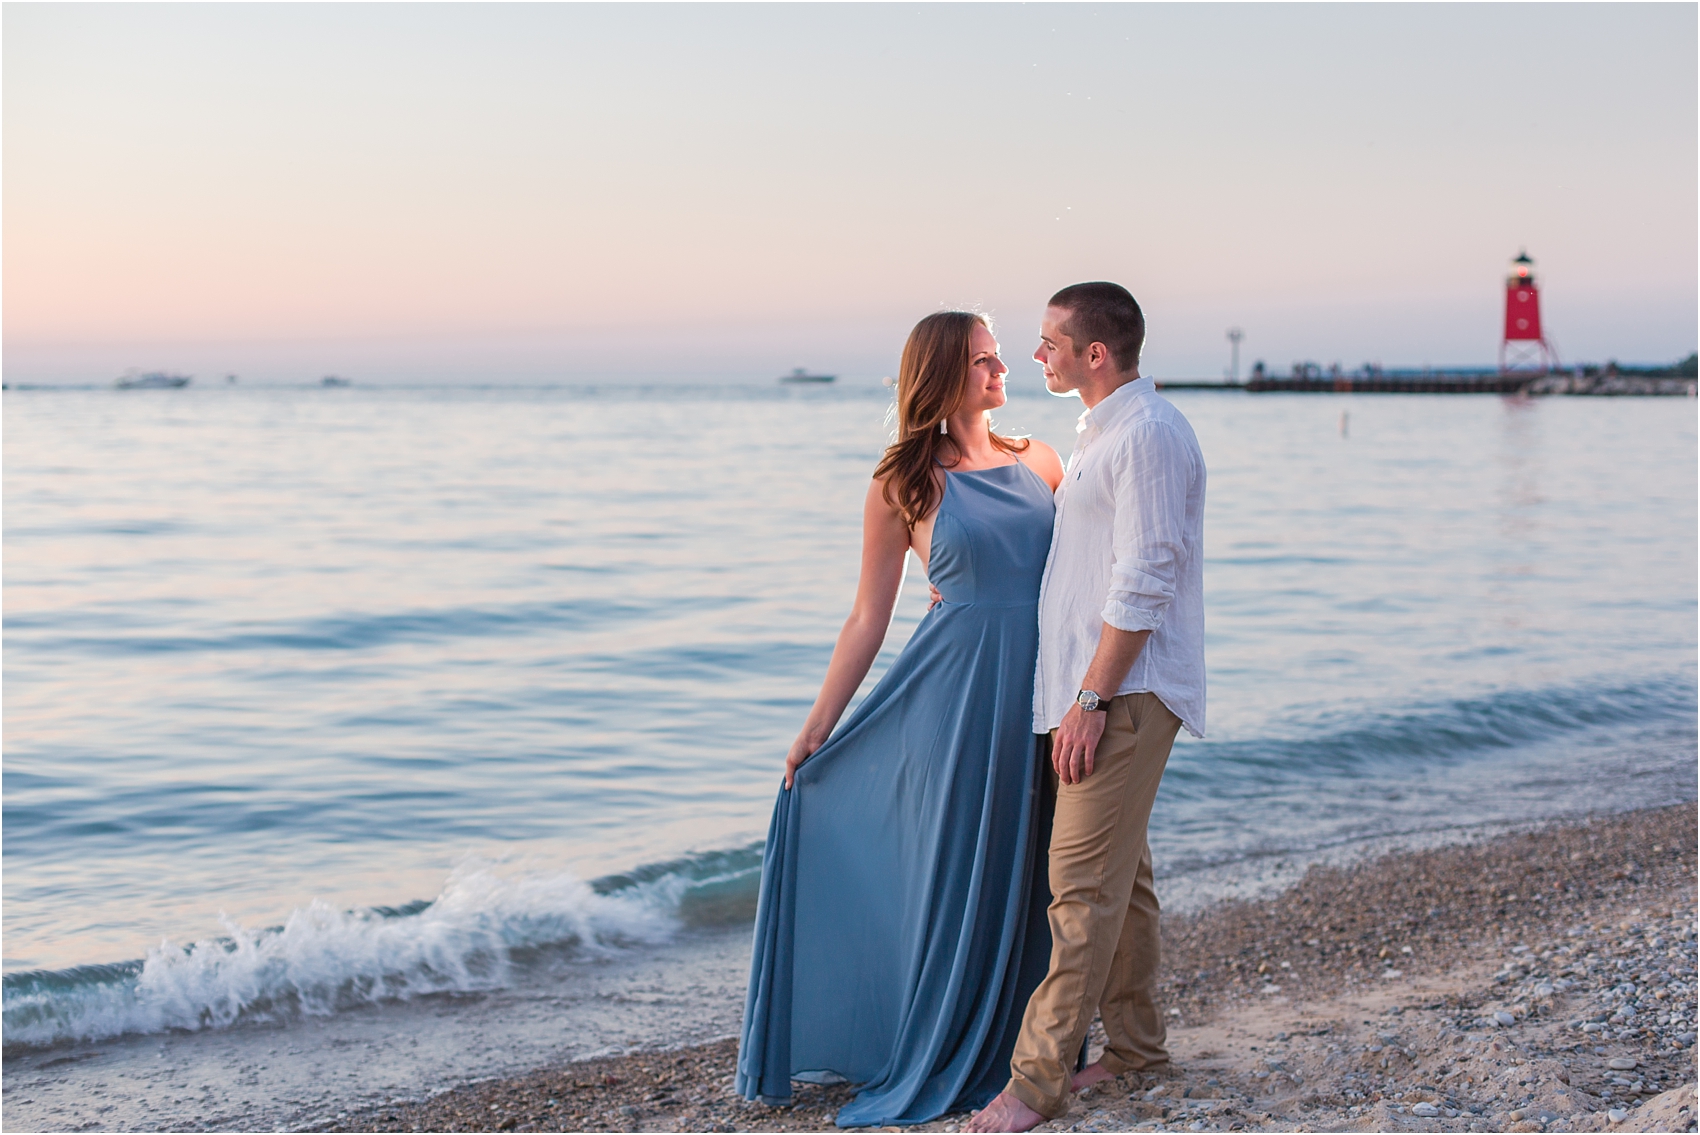 romantic-sunset-engagement-photos-at-michigan-beach-park-in-charlevoix-mi-by-courtney-carolyn-photography_0017.jpg